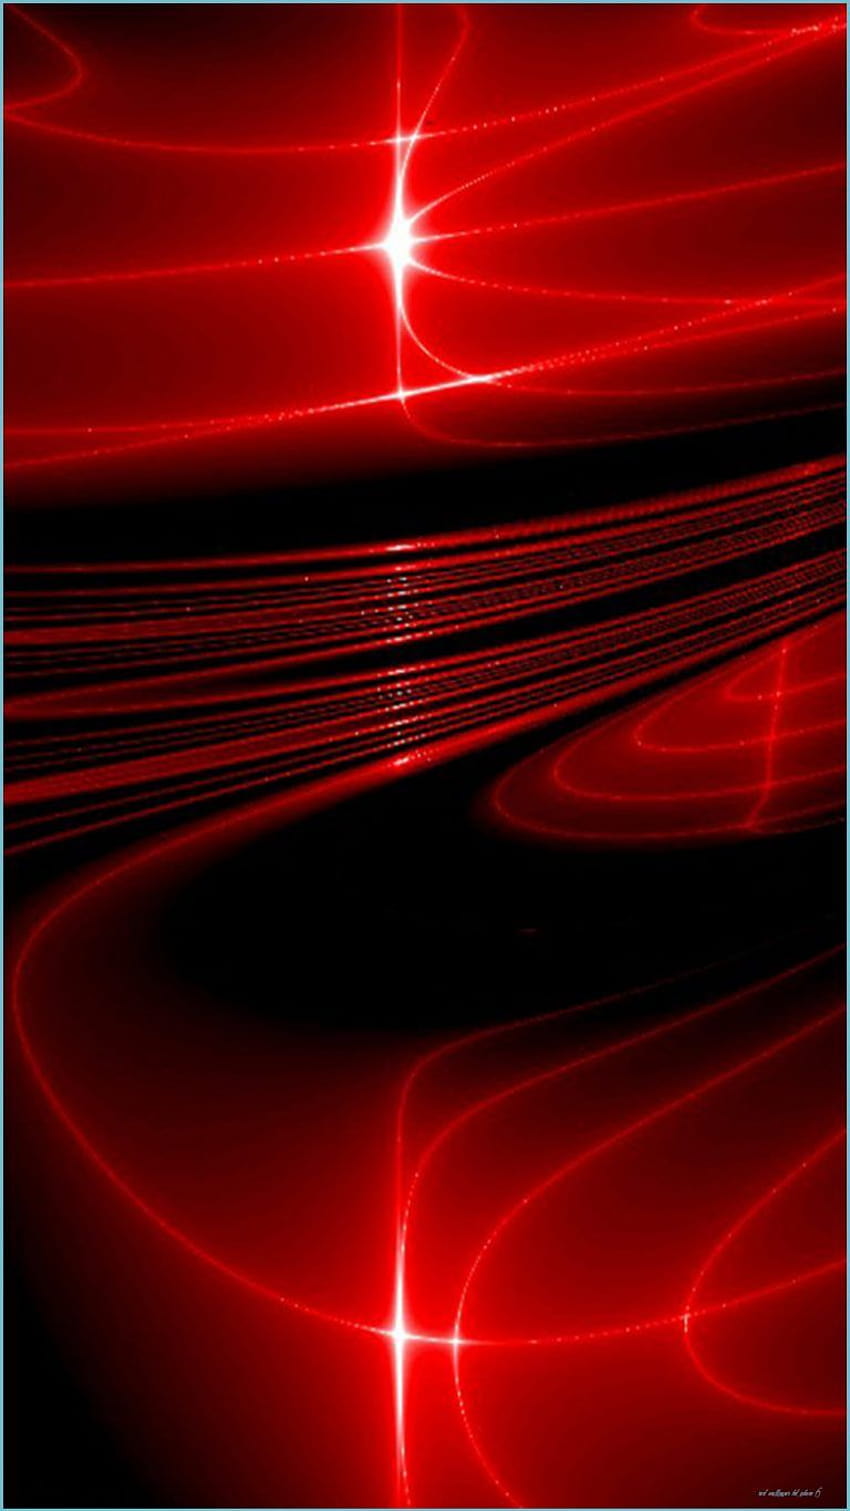 iPhone 12 (Pro) Live Wallpapers - Download | Iphone wallpaper green, Dark  wallpaper iphone, Apple wallpaper iphone